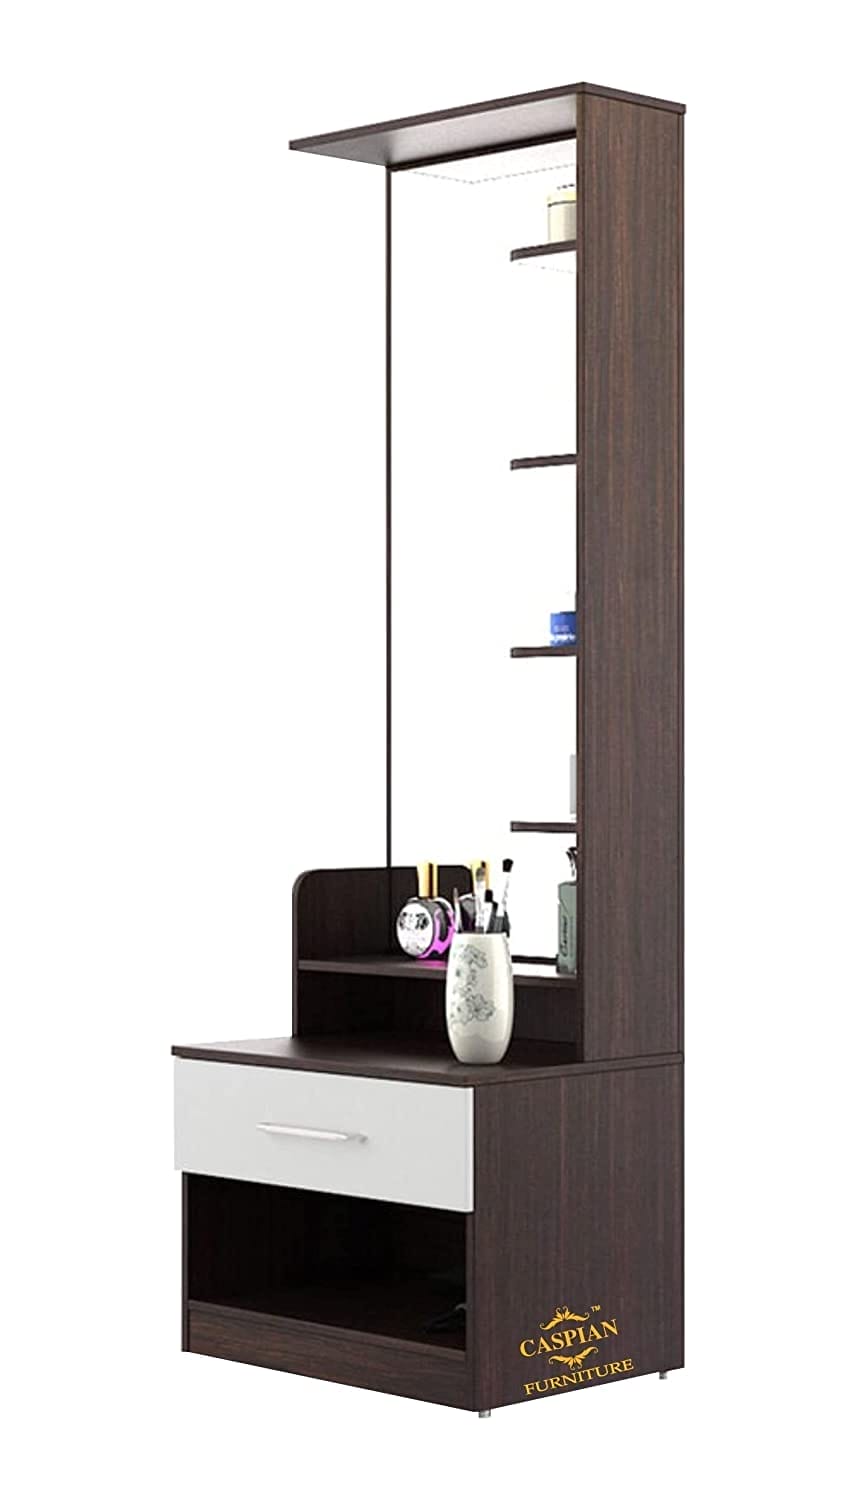 Dressing Table with Shelves and Drawer || Make up Table|| Organizer for Room Engineered Wood Dressing Table (Coffee Black & White)